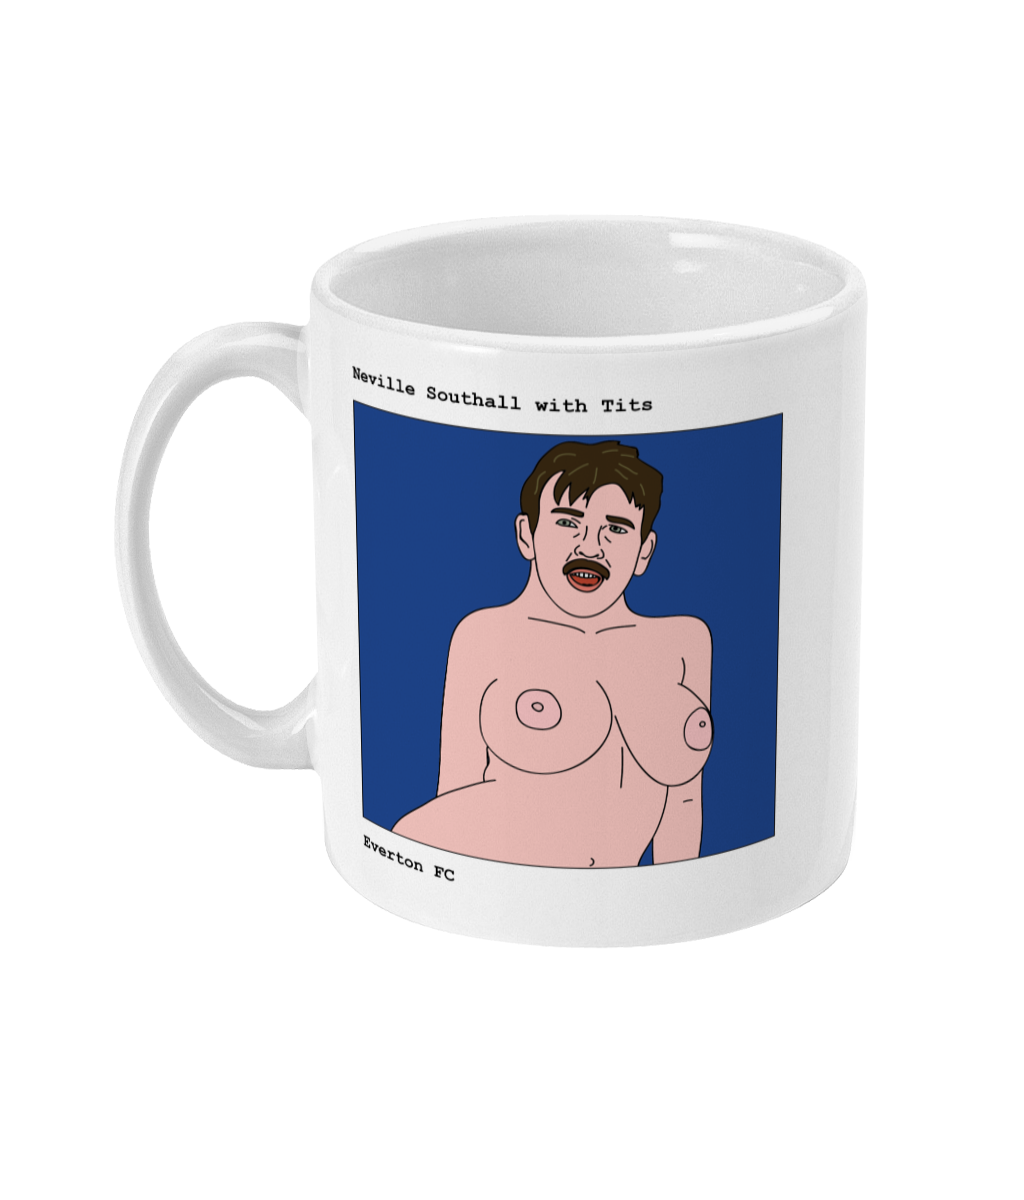 Neville Southall with Tits - Footballers with Tits